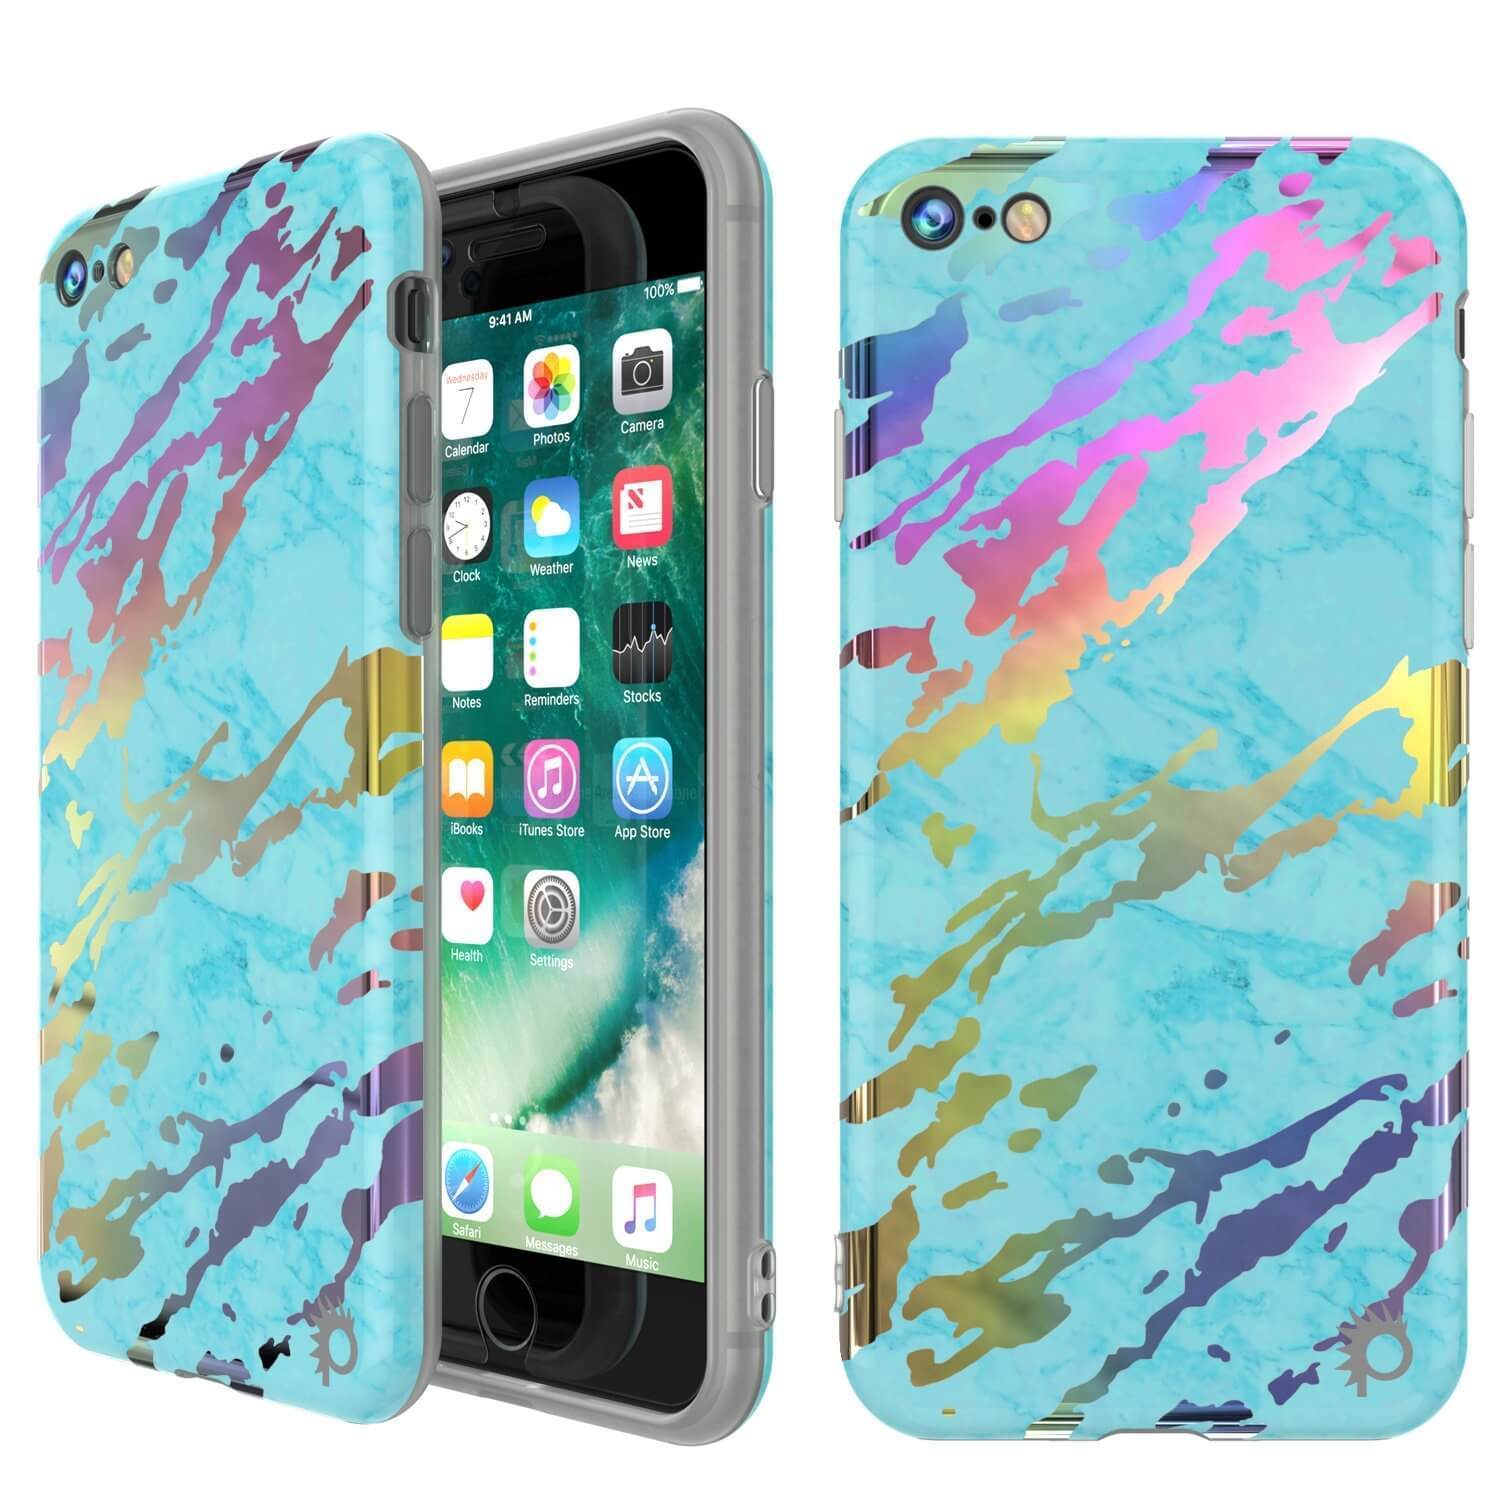 Punkcase iPhone SE (4.7") Marble Case, Protective Full Body Cover W/9H Tempered Glass Screen Protector (Teal Onyx)